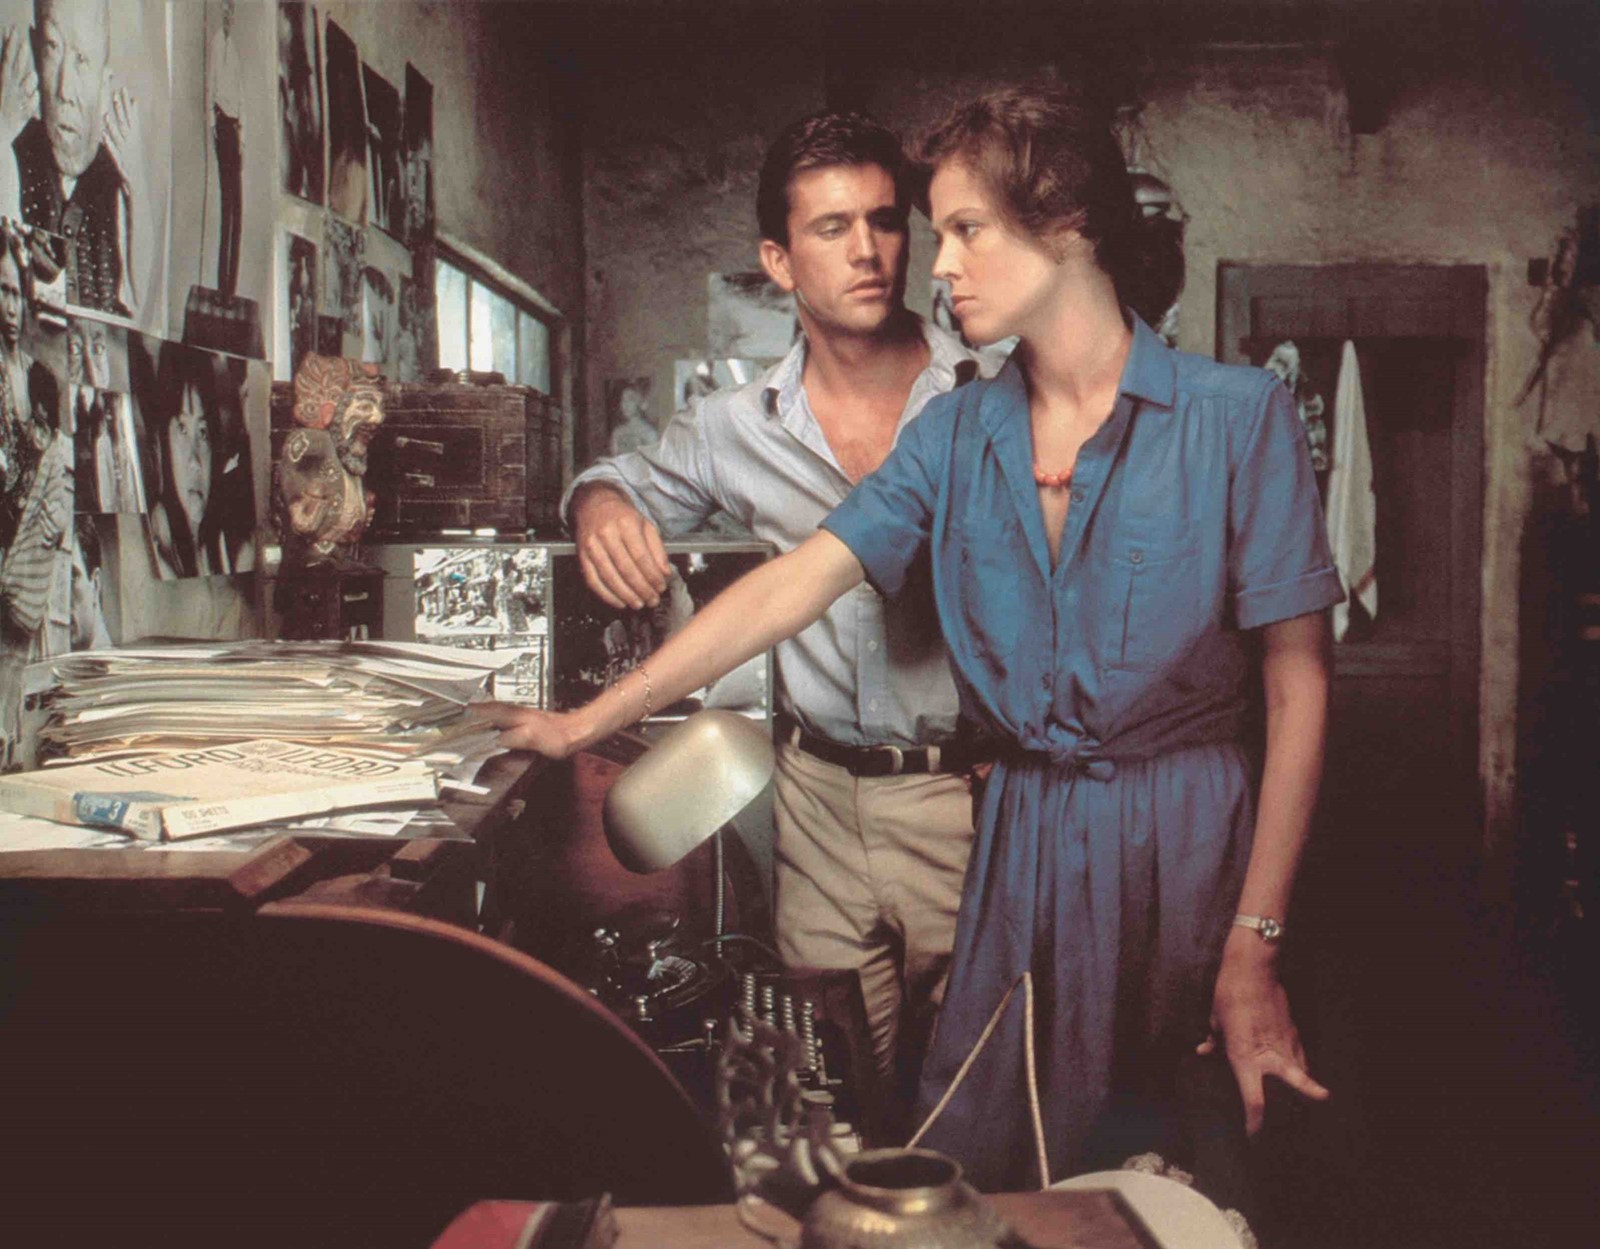 Sigourney Weaver in The Year of Living Dangerously by direct